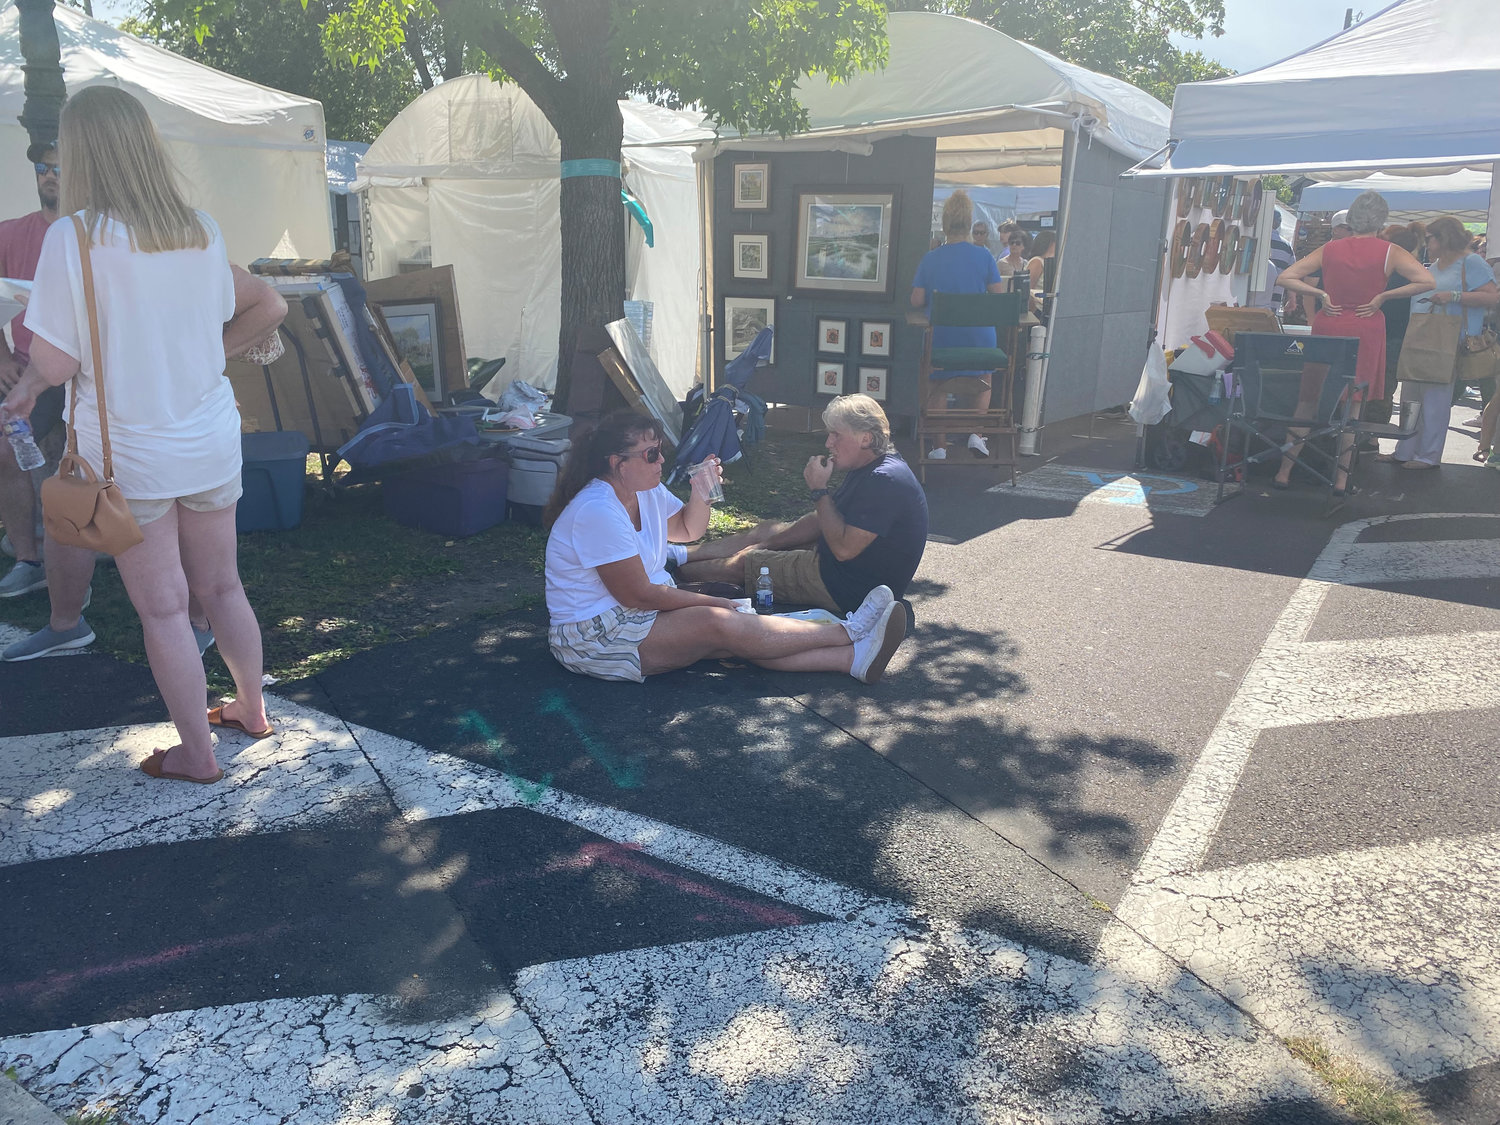 A couple takes a break from the bright sun and crowded streets at the Doylestown Arts Festival to enjoy a cold drink and a bite to eat.